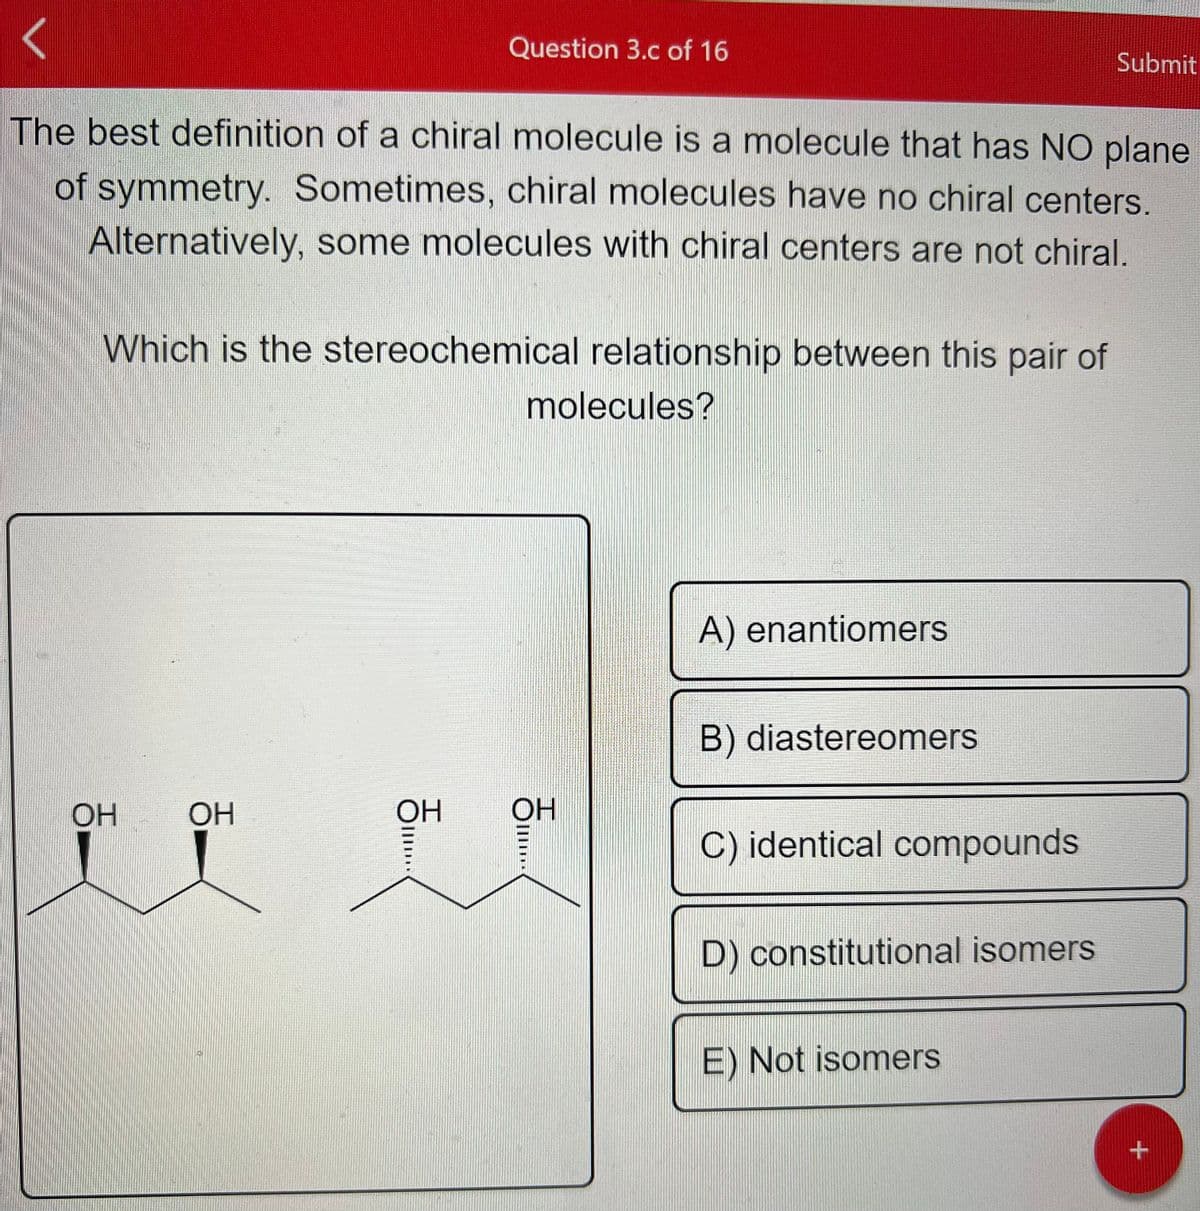 The best definition of a chiral molecule is a molecule that has NO plane
of symmetry. Sometimes, chiral molecules have no chiral centers.
Alternatively, some molecules with chiral centers are not chiral.
Which is the stereochemical relationship between this pair of
OH
OH
Question 3.c of 16
F...
OH
molecules?
OH
...
A) enantiomers
B) diastereomers
C) identical compounds
D) constitutional isomers
Submit
E) Not isomers
+